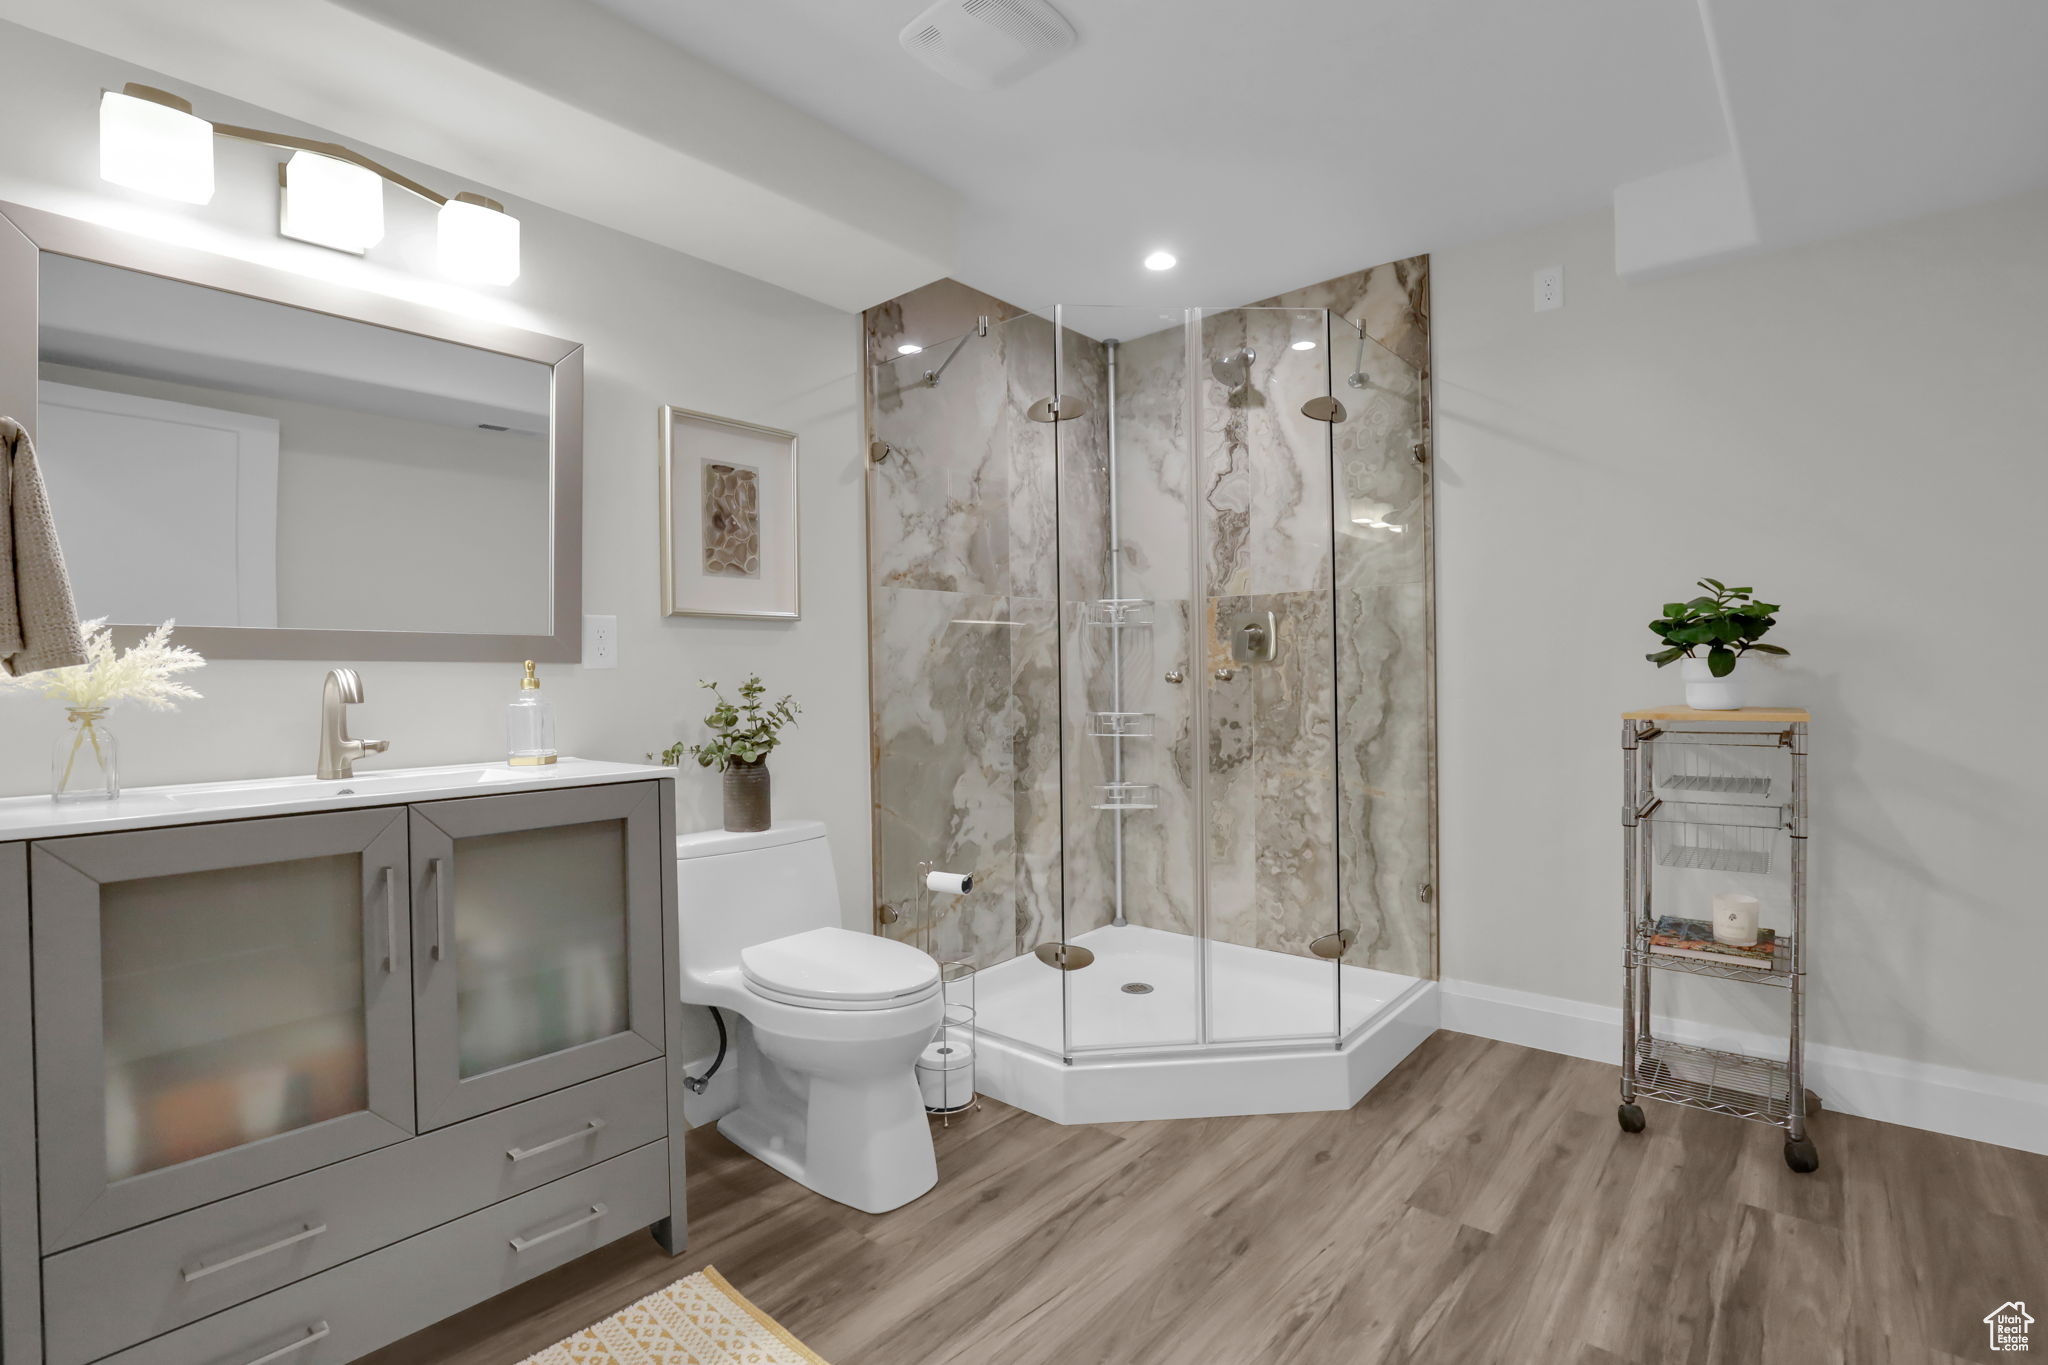 Bathroom with an enclosed shower, toilet, vanity with extensive cabinet space, and hardwood / wood-style floors